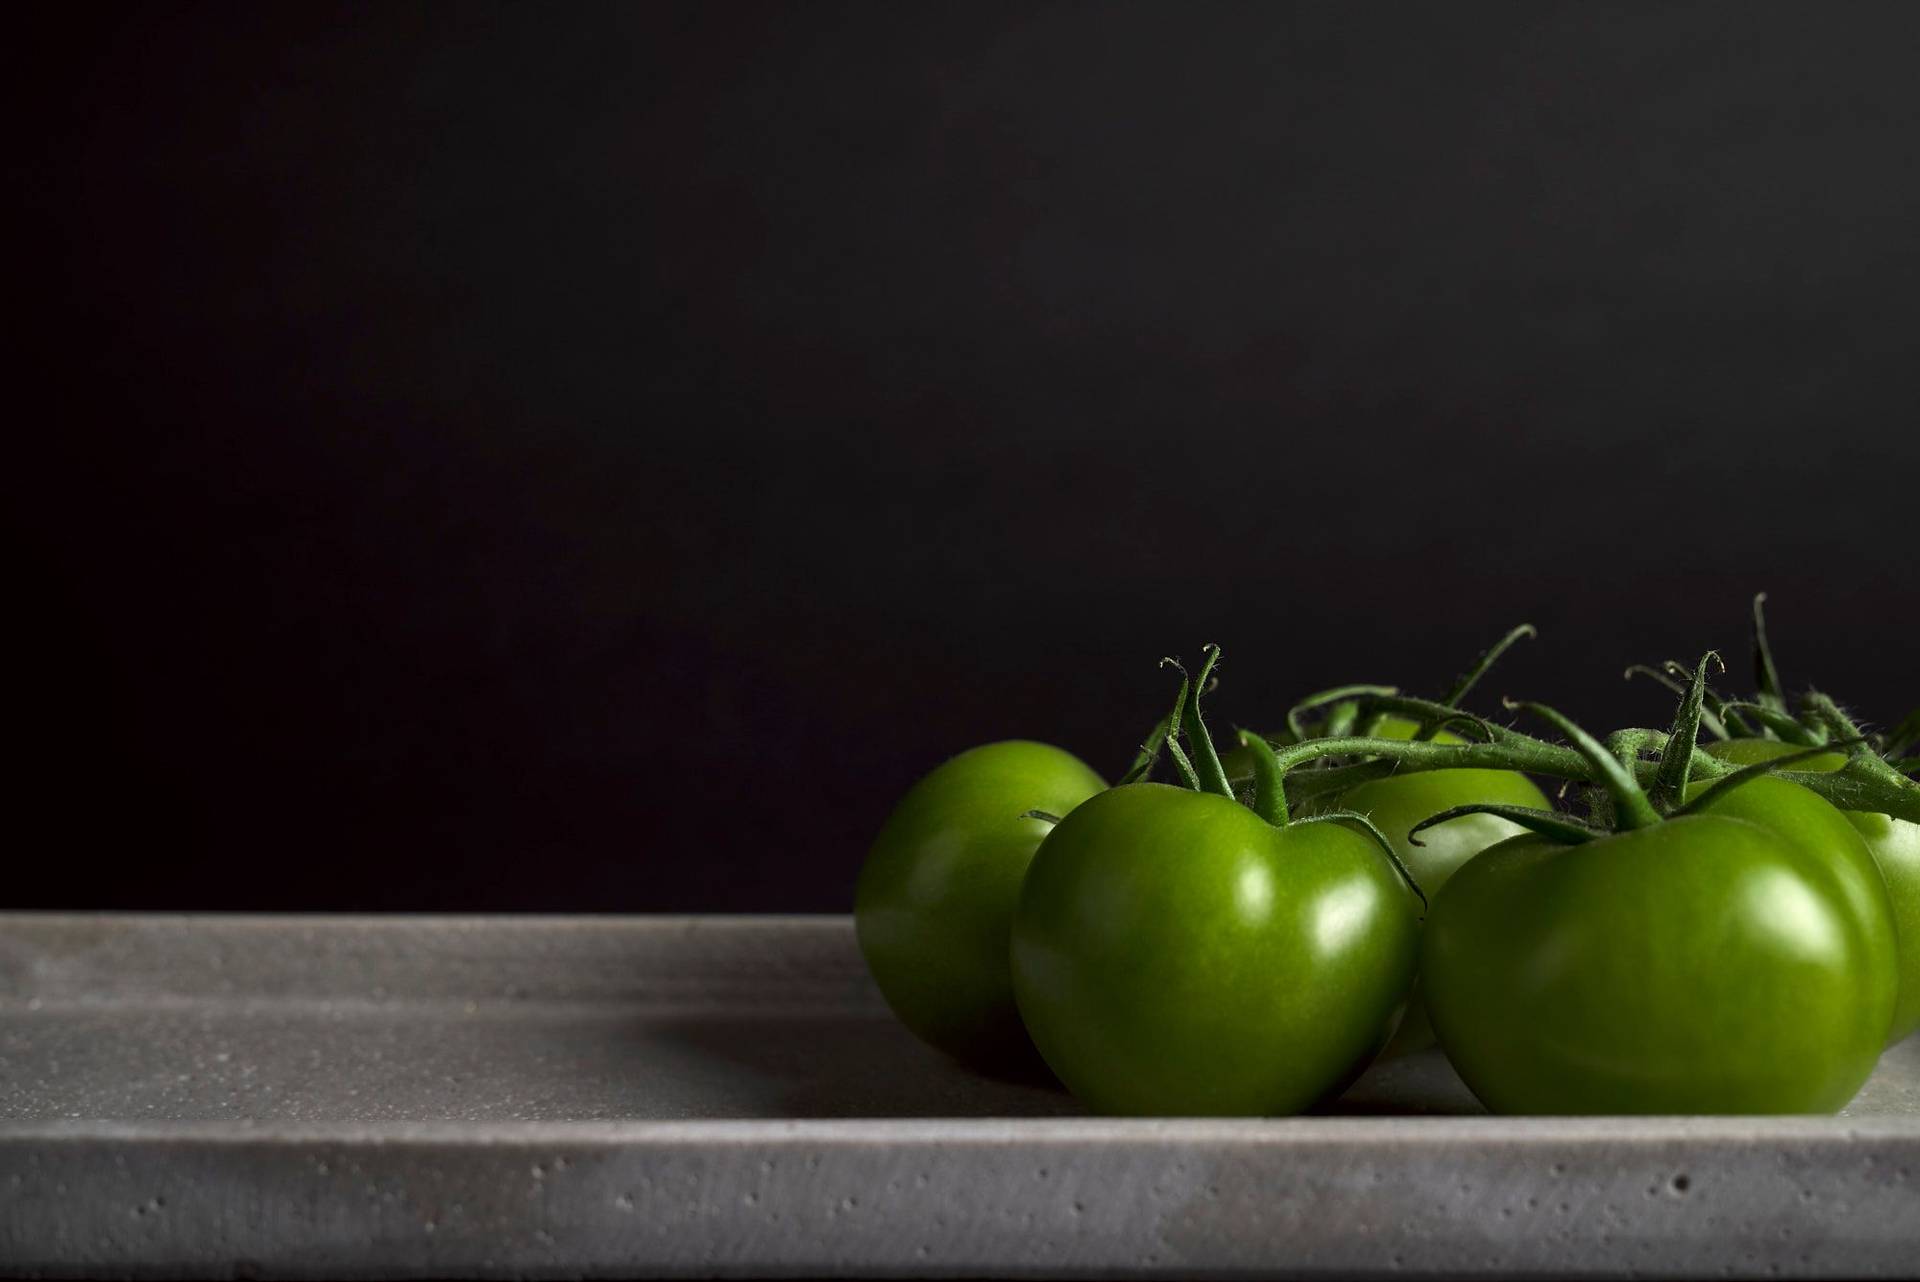 five green tomatoes on a concrete plate on black background